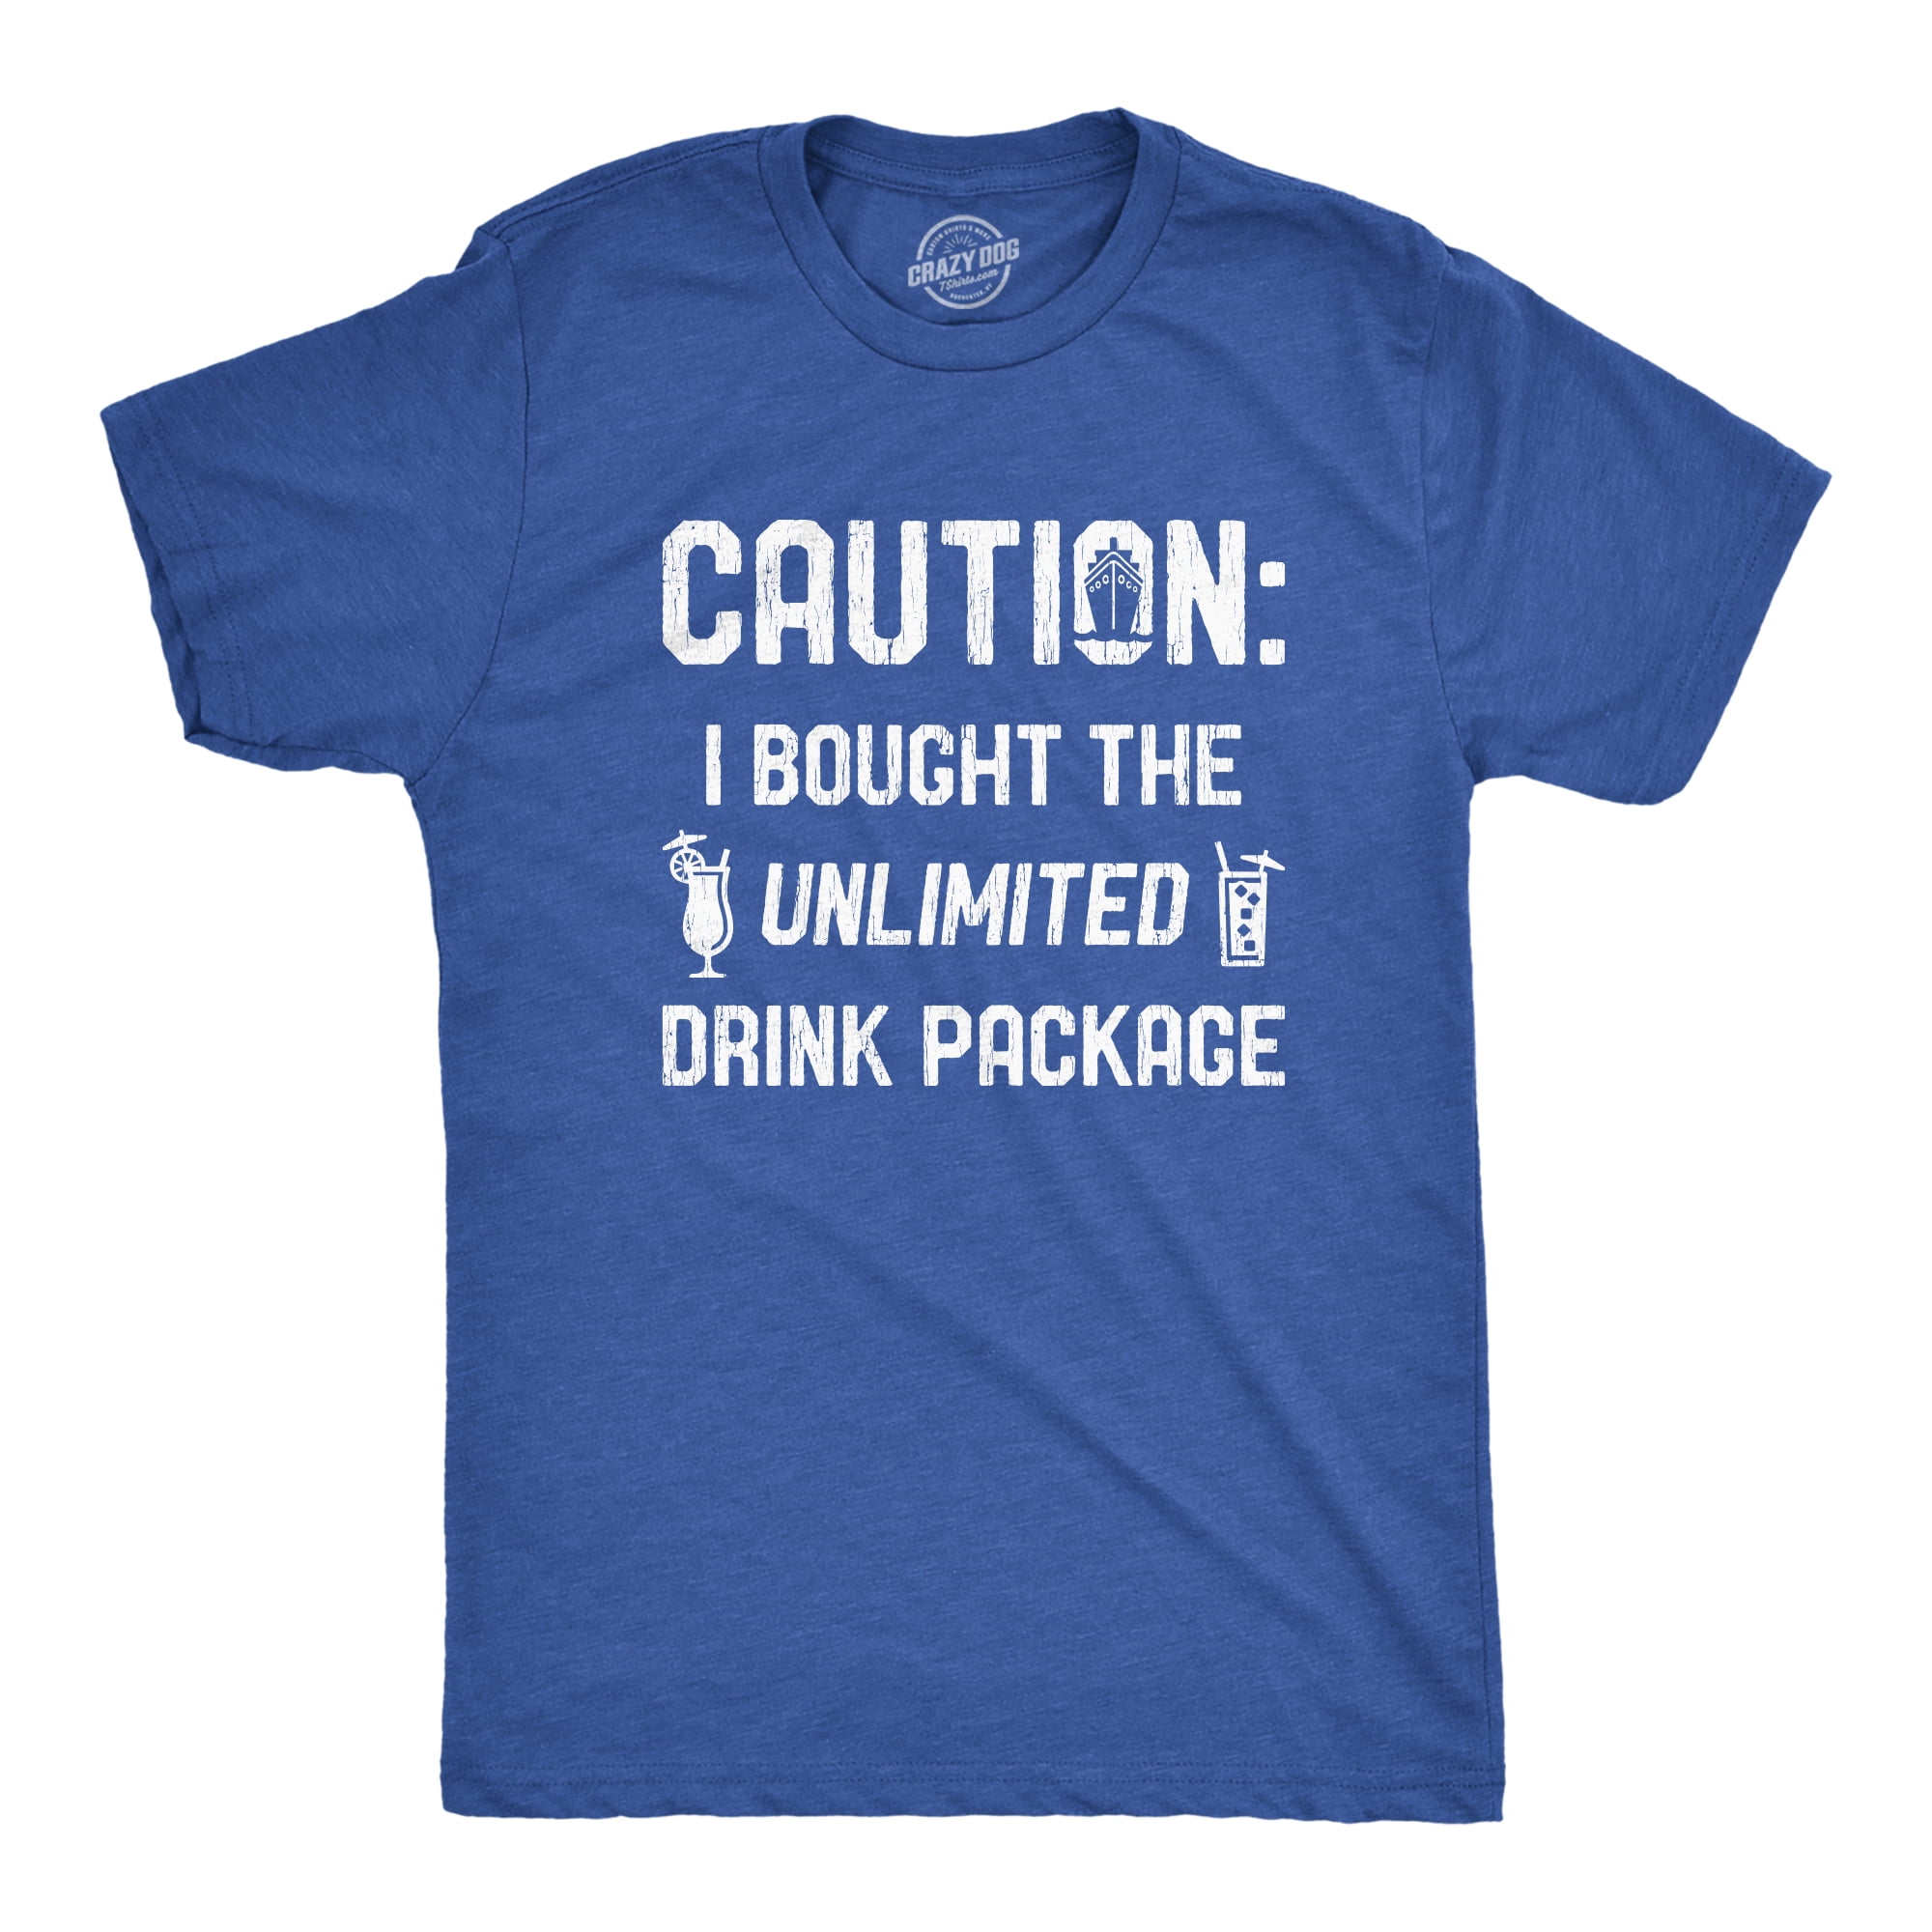 Mens Caution I Bought The Unlimited Drink Package Tshirt Funny